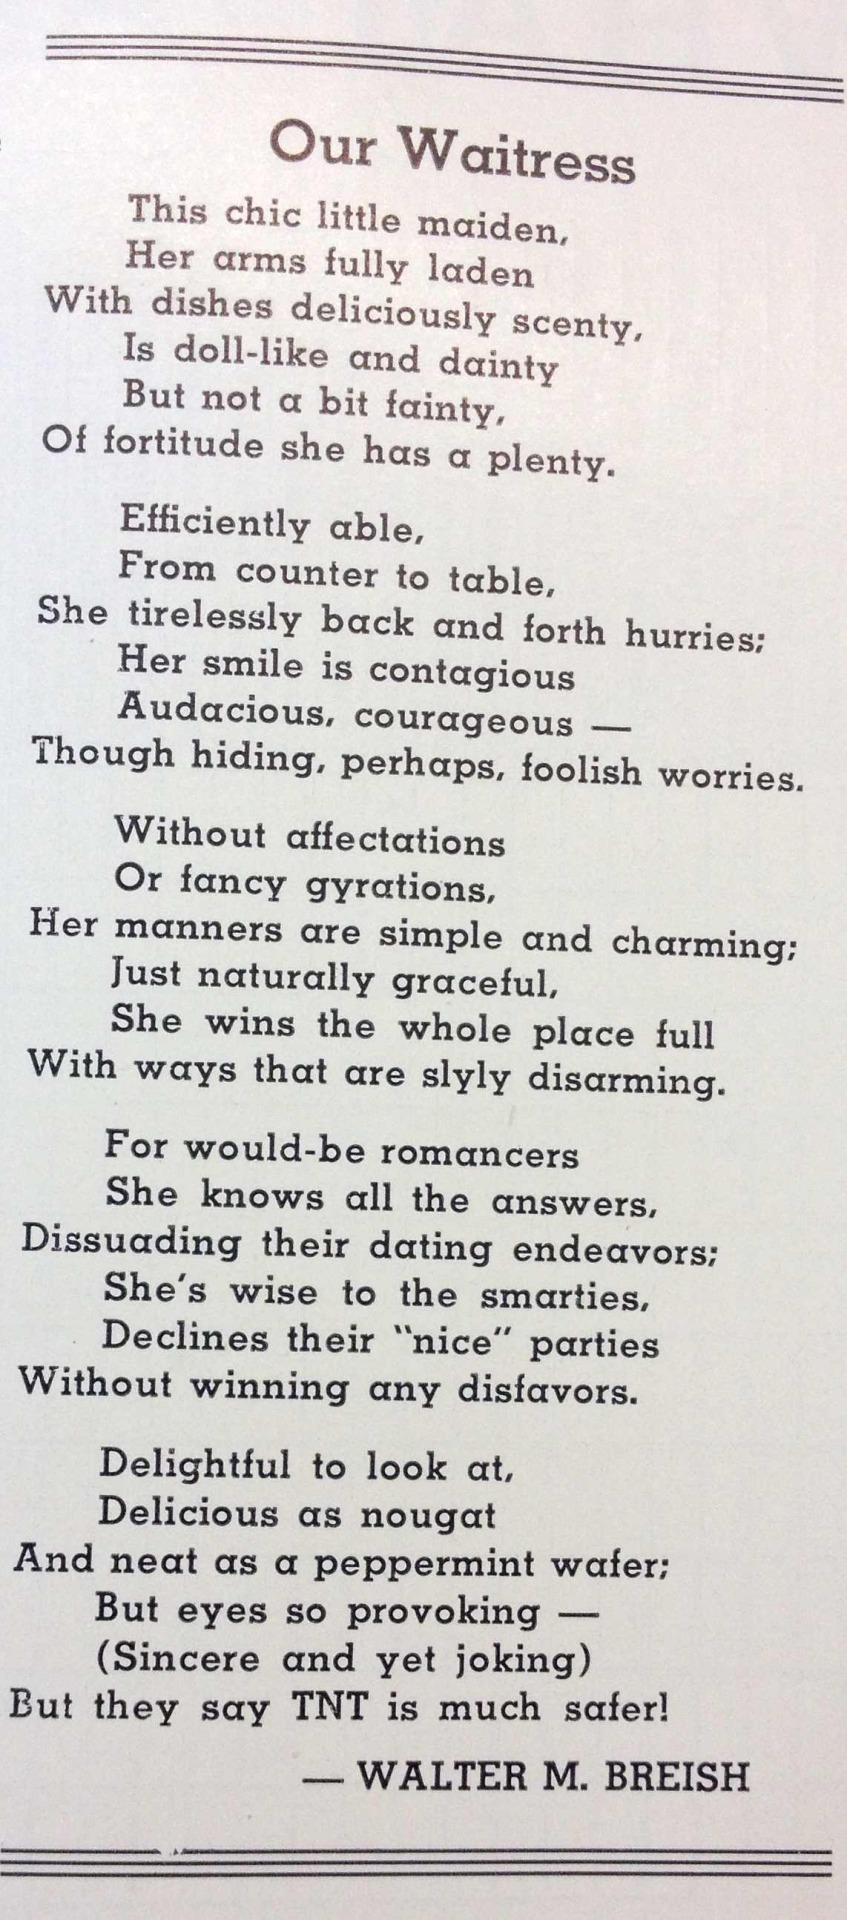 As part of their December 1936 tribute to the rise of “The Woman Executive” in restaurants and tea-rooms across the country, Restaurant Management magazine included this ode to the waitress.